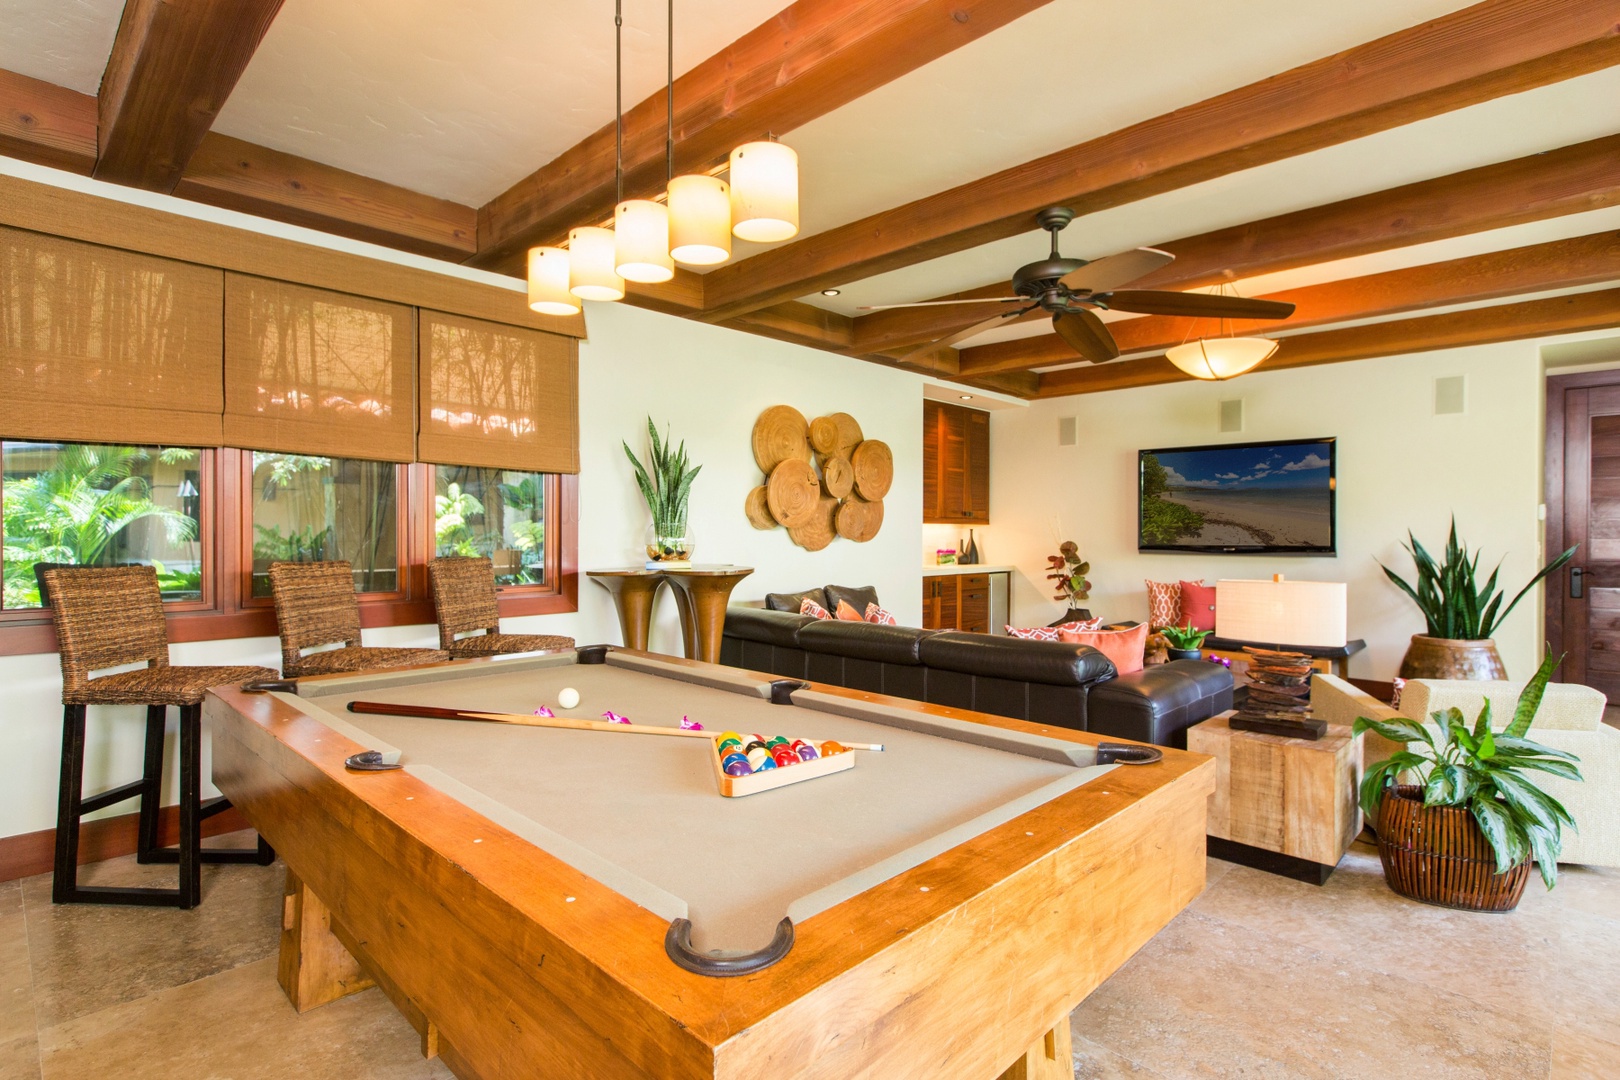 Honolulu Vacation Rentals, Banyan House 4 Bedroom - Game Room with Pool Table